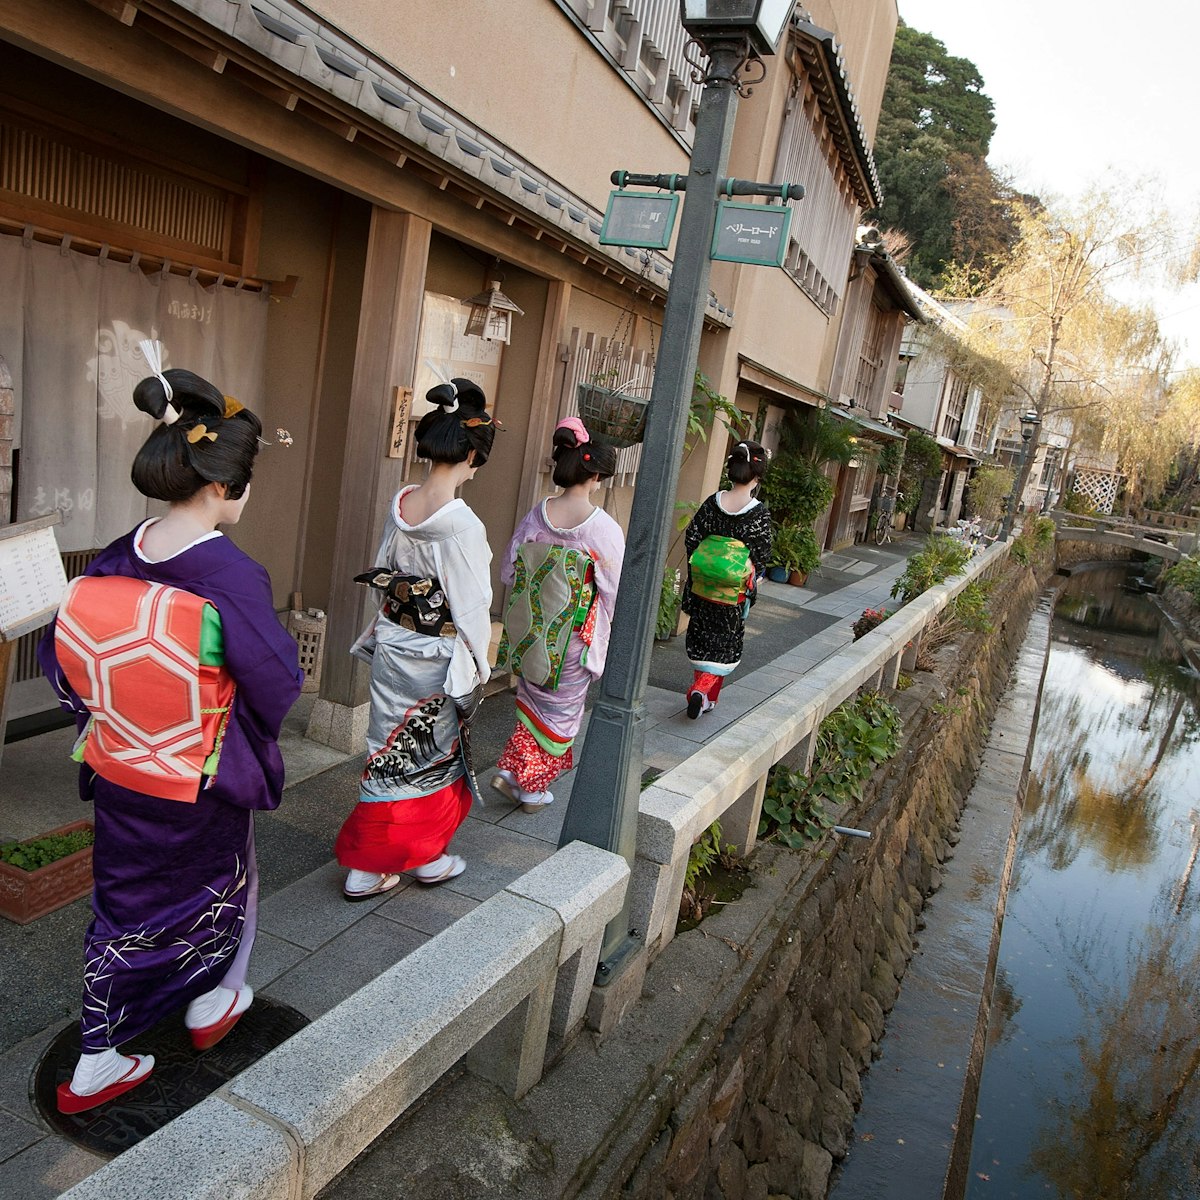 SHIMODA, JAPAN - DECEMBER 14:  Trainee geisha women, known as 'maiko', walk beside a canal on Perry Road, on December 14, 2011 in Shimoda, Japan. Shimoda, a Japanese fishing town, advertised for three women to train as geisha after their numbers fell dramatically. Once qualified in March 2012, they will work in an initiative to revive the geisha culture and rejuvenate the local tourism industry. (Photo by Jeremy Sutton-Hibbert/Getty Images)